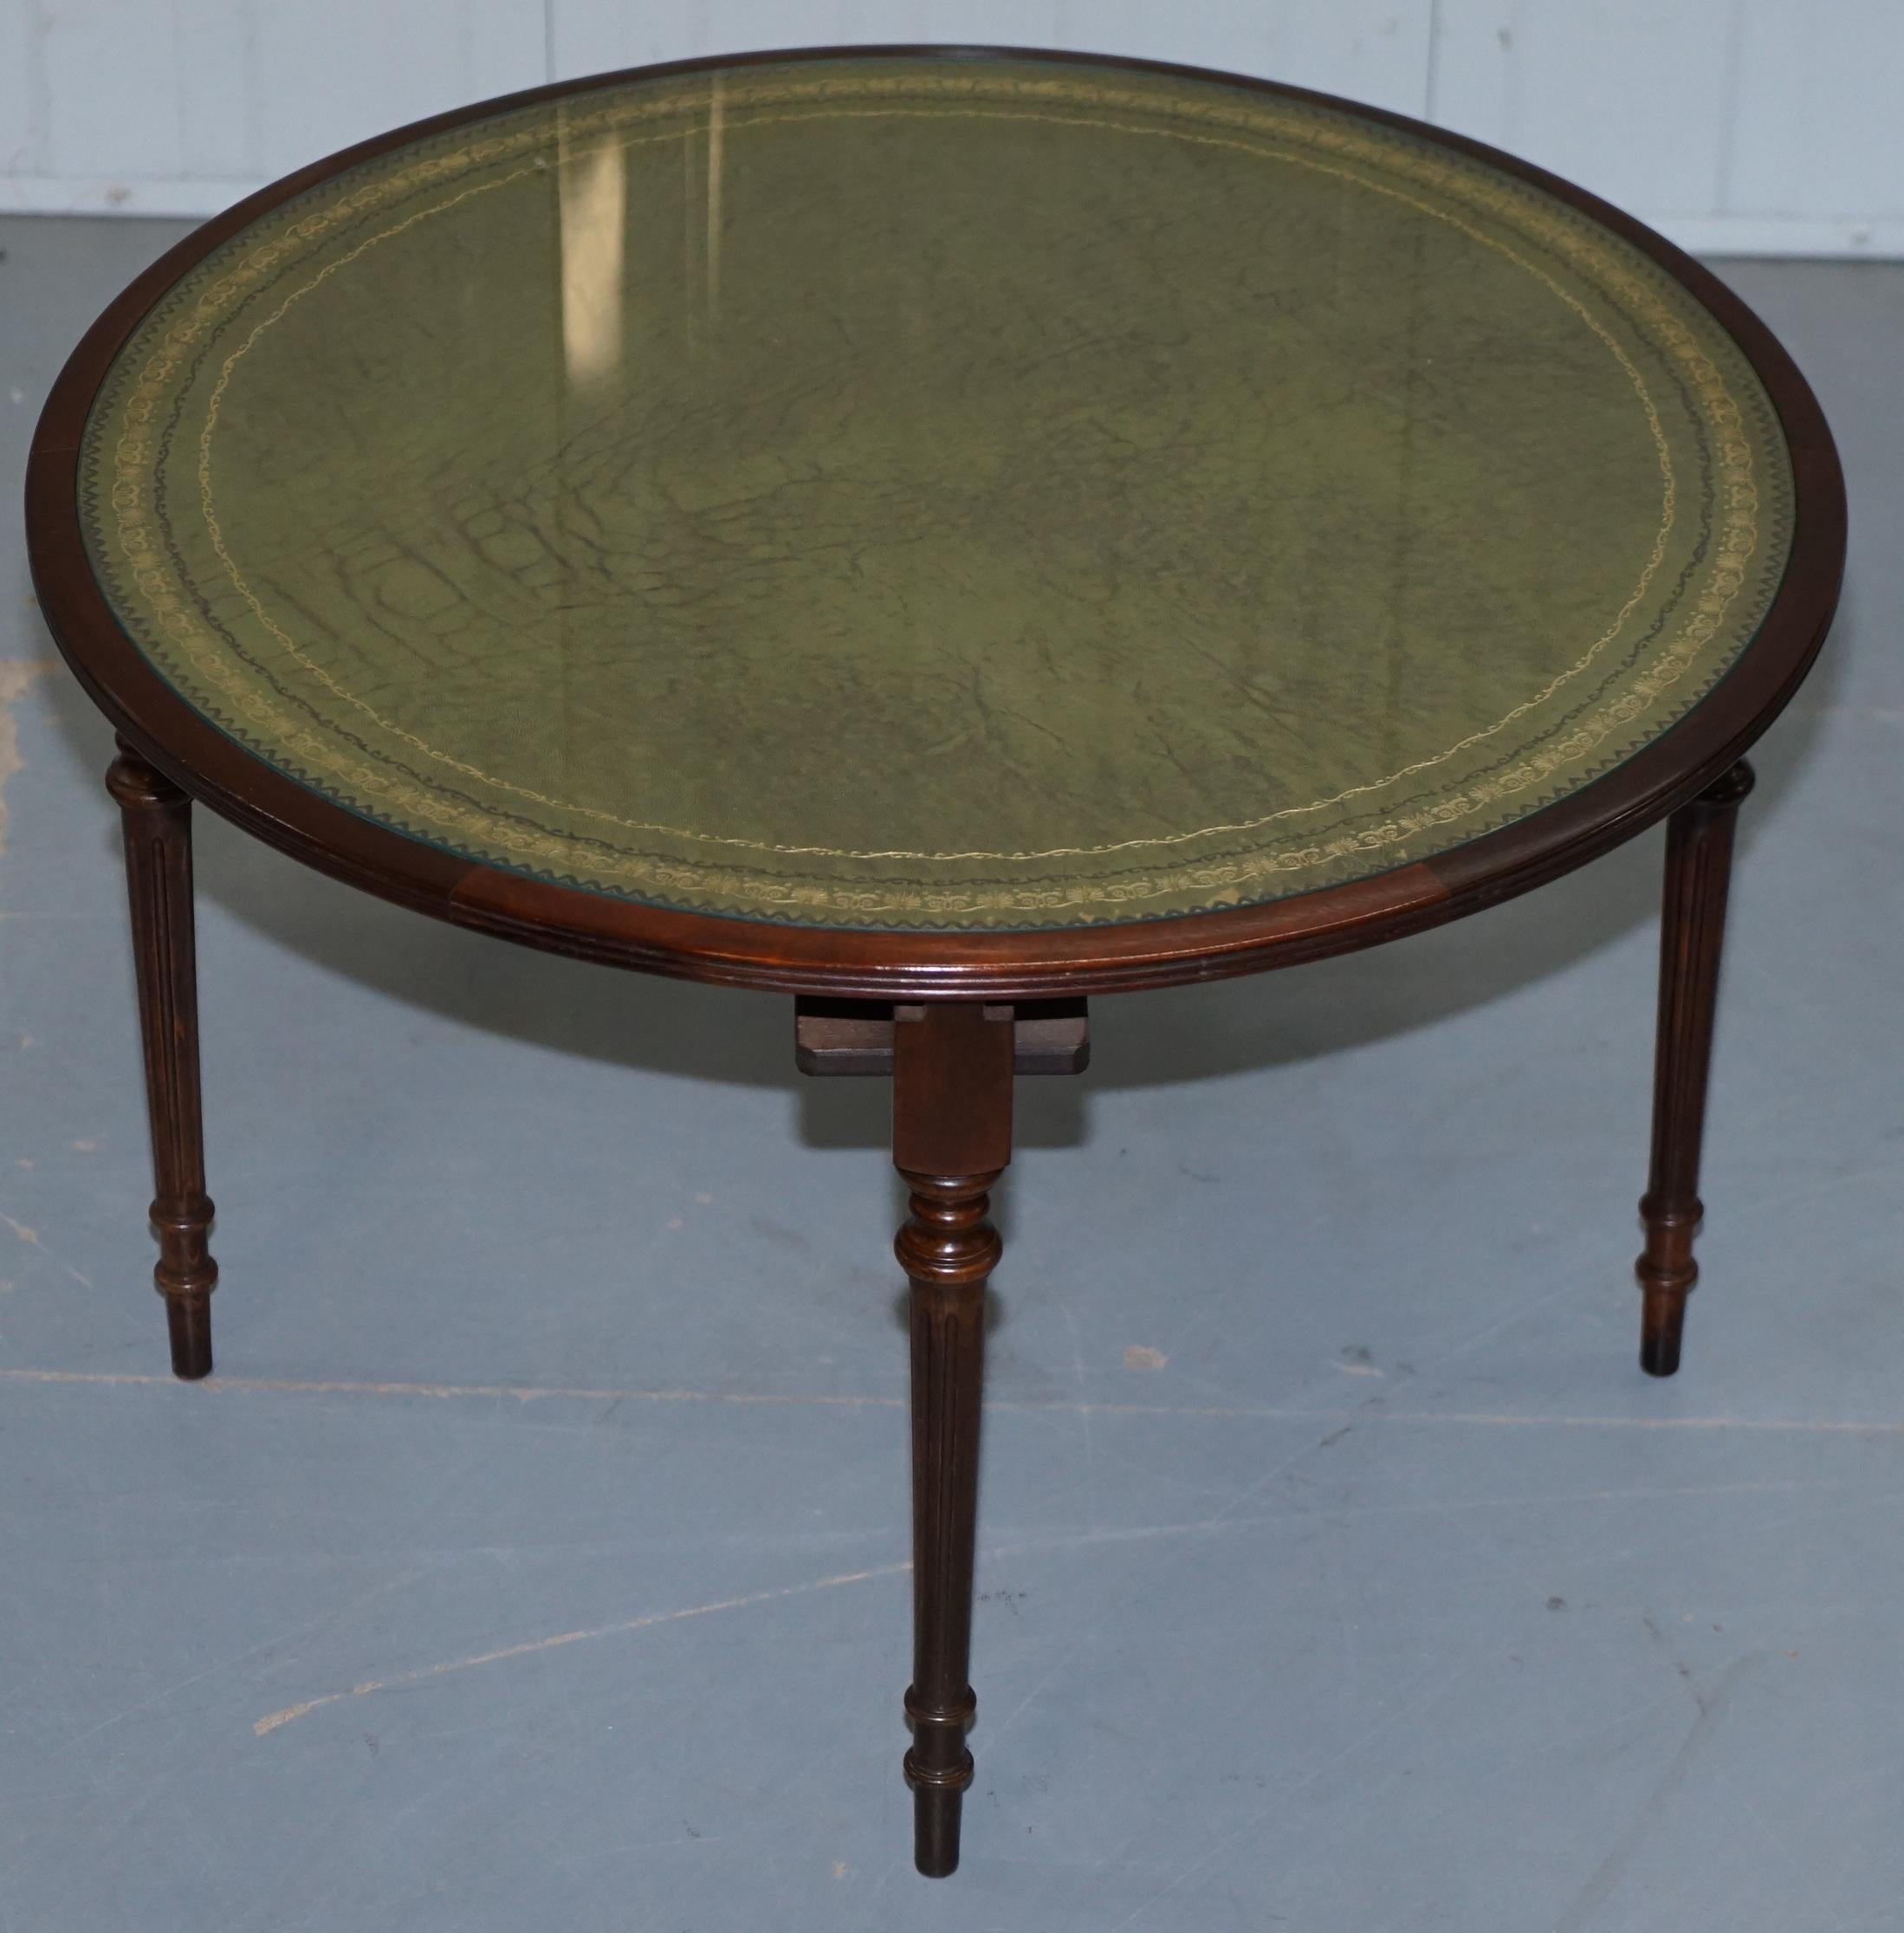 Modern Vintage Mahogany & Green Leather Topped Coffee Table Plus 4 Nest of Small Tables